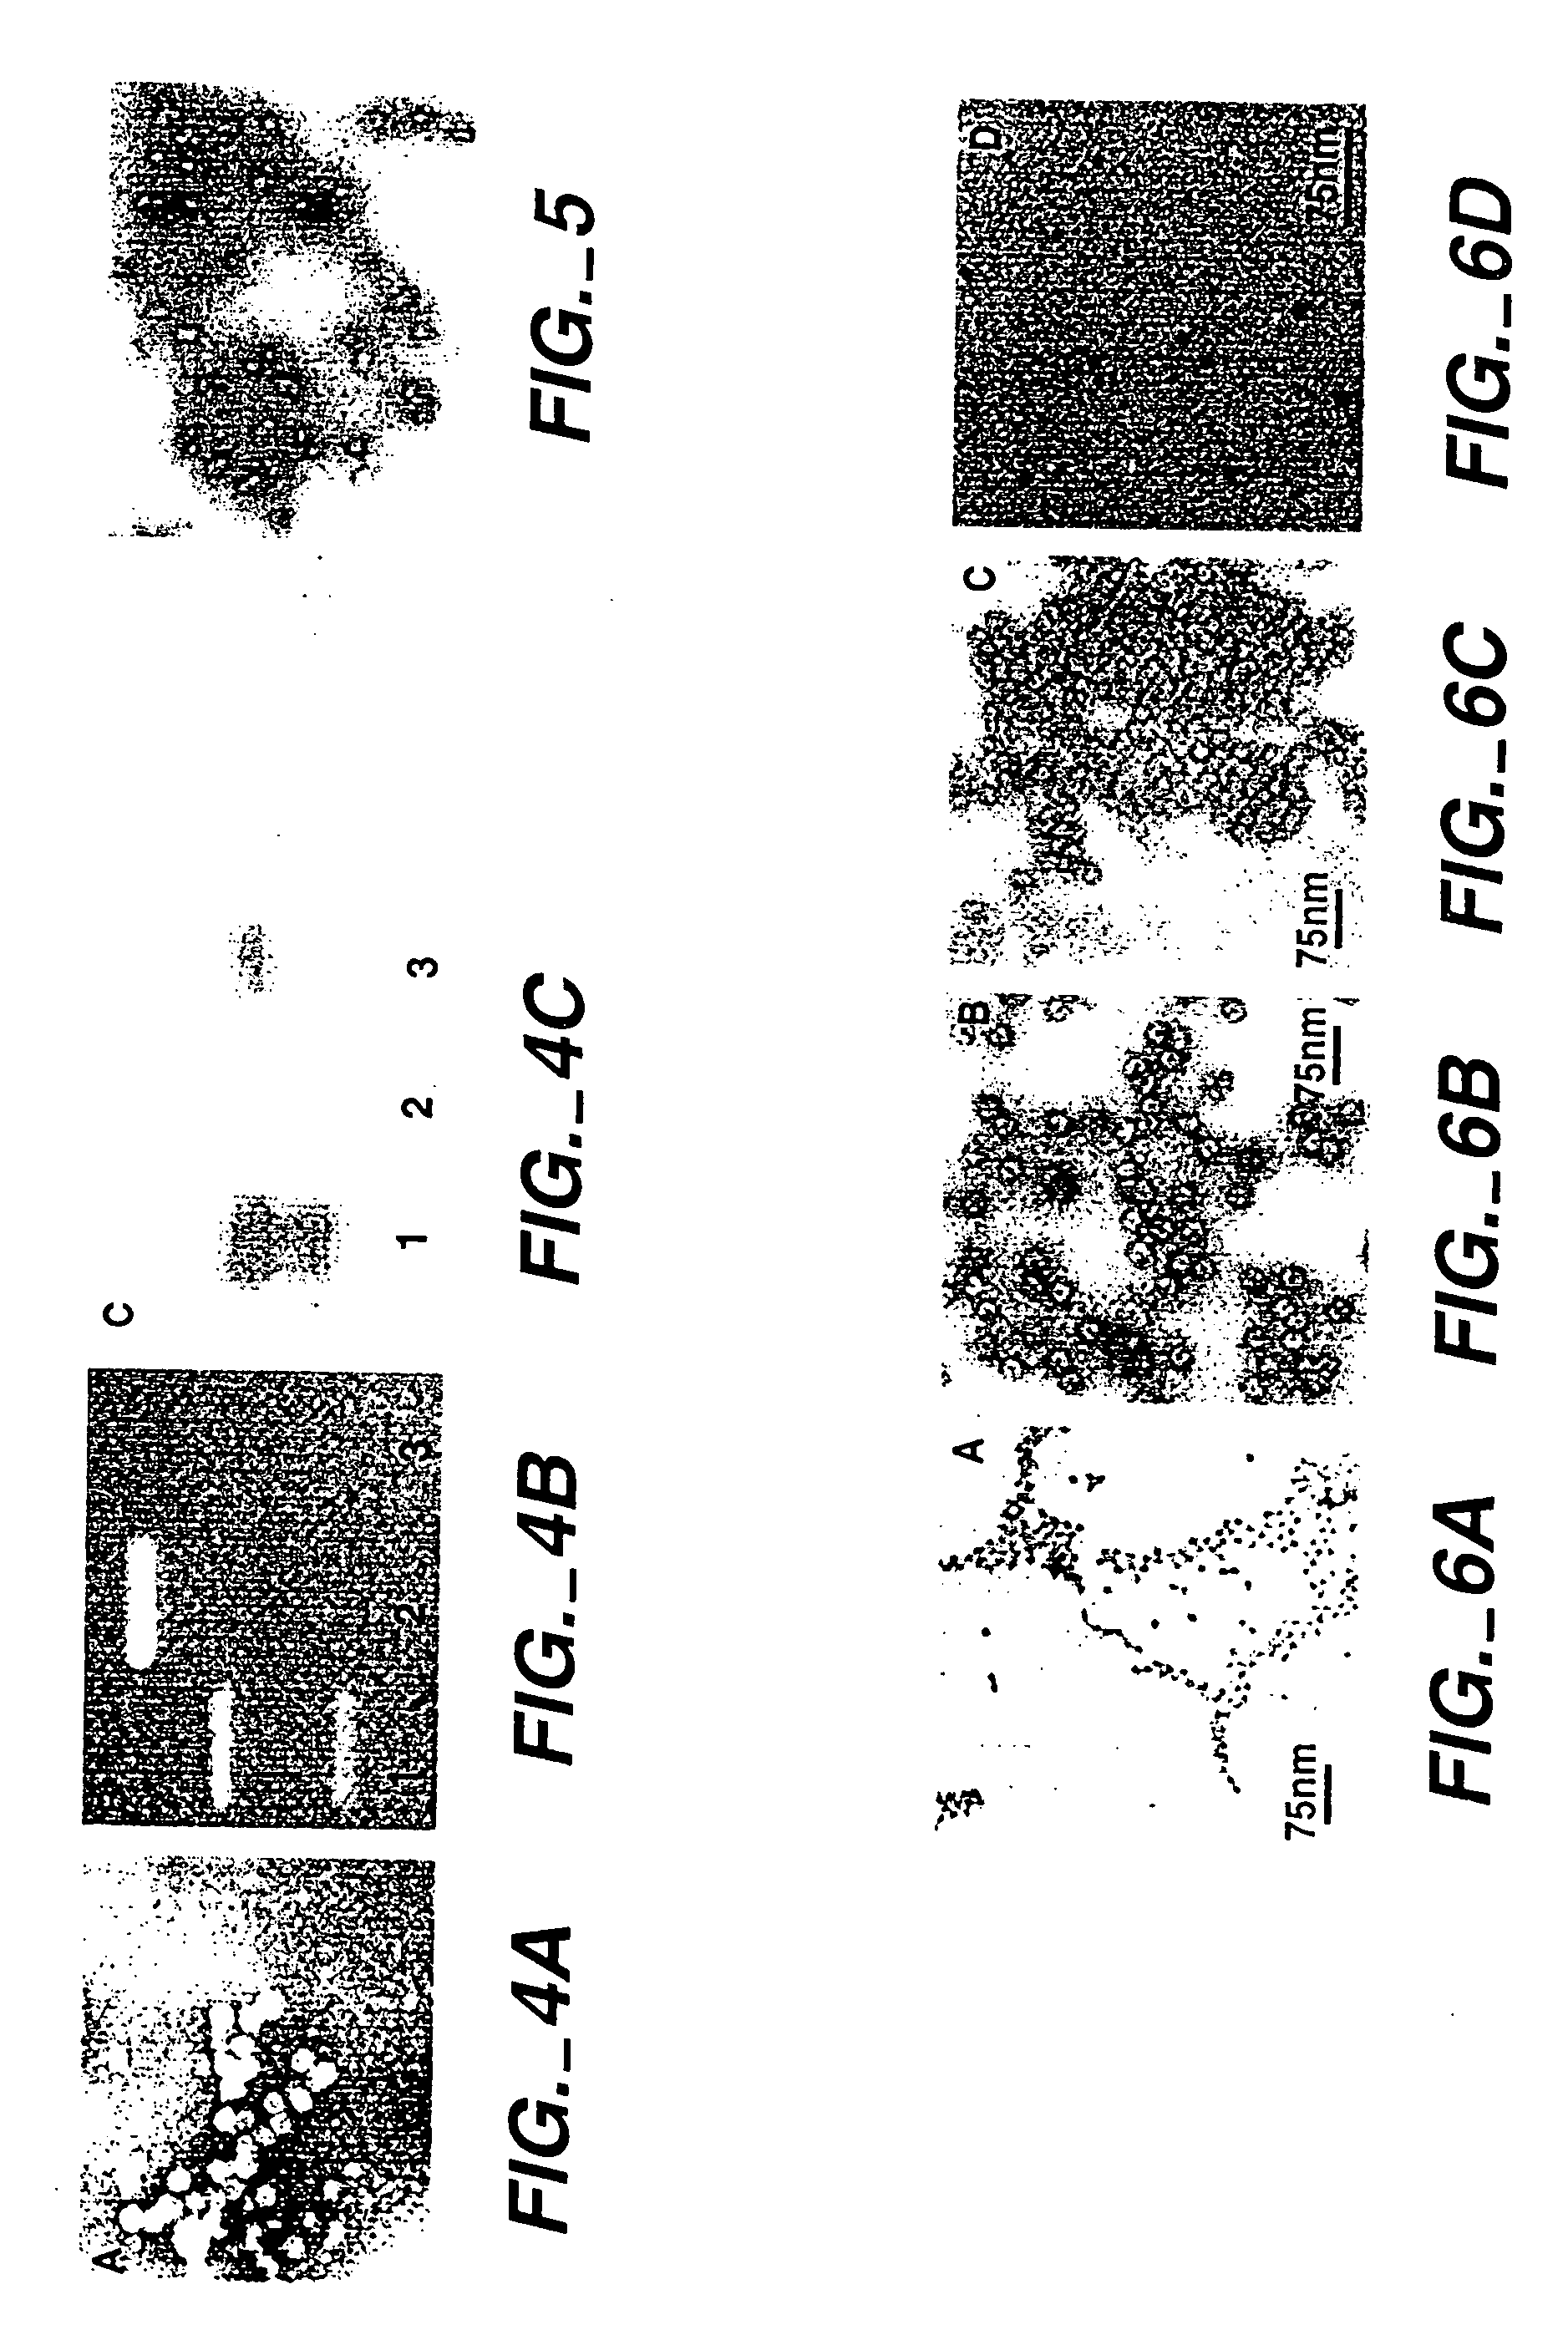 Protein cages for the delivery of medical imaging and therapeutic agents